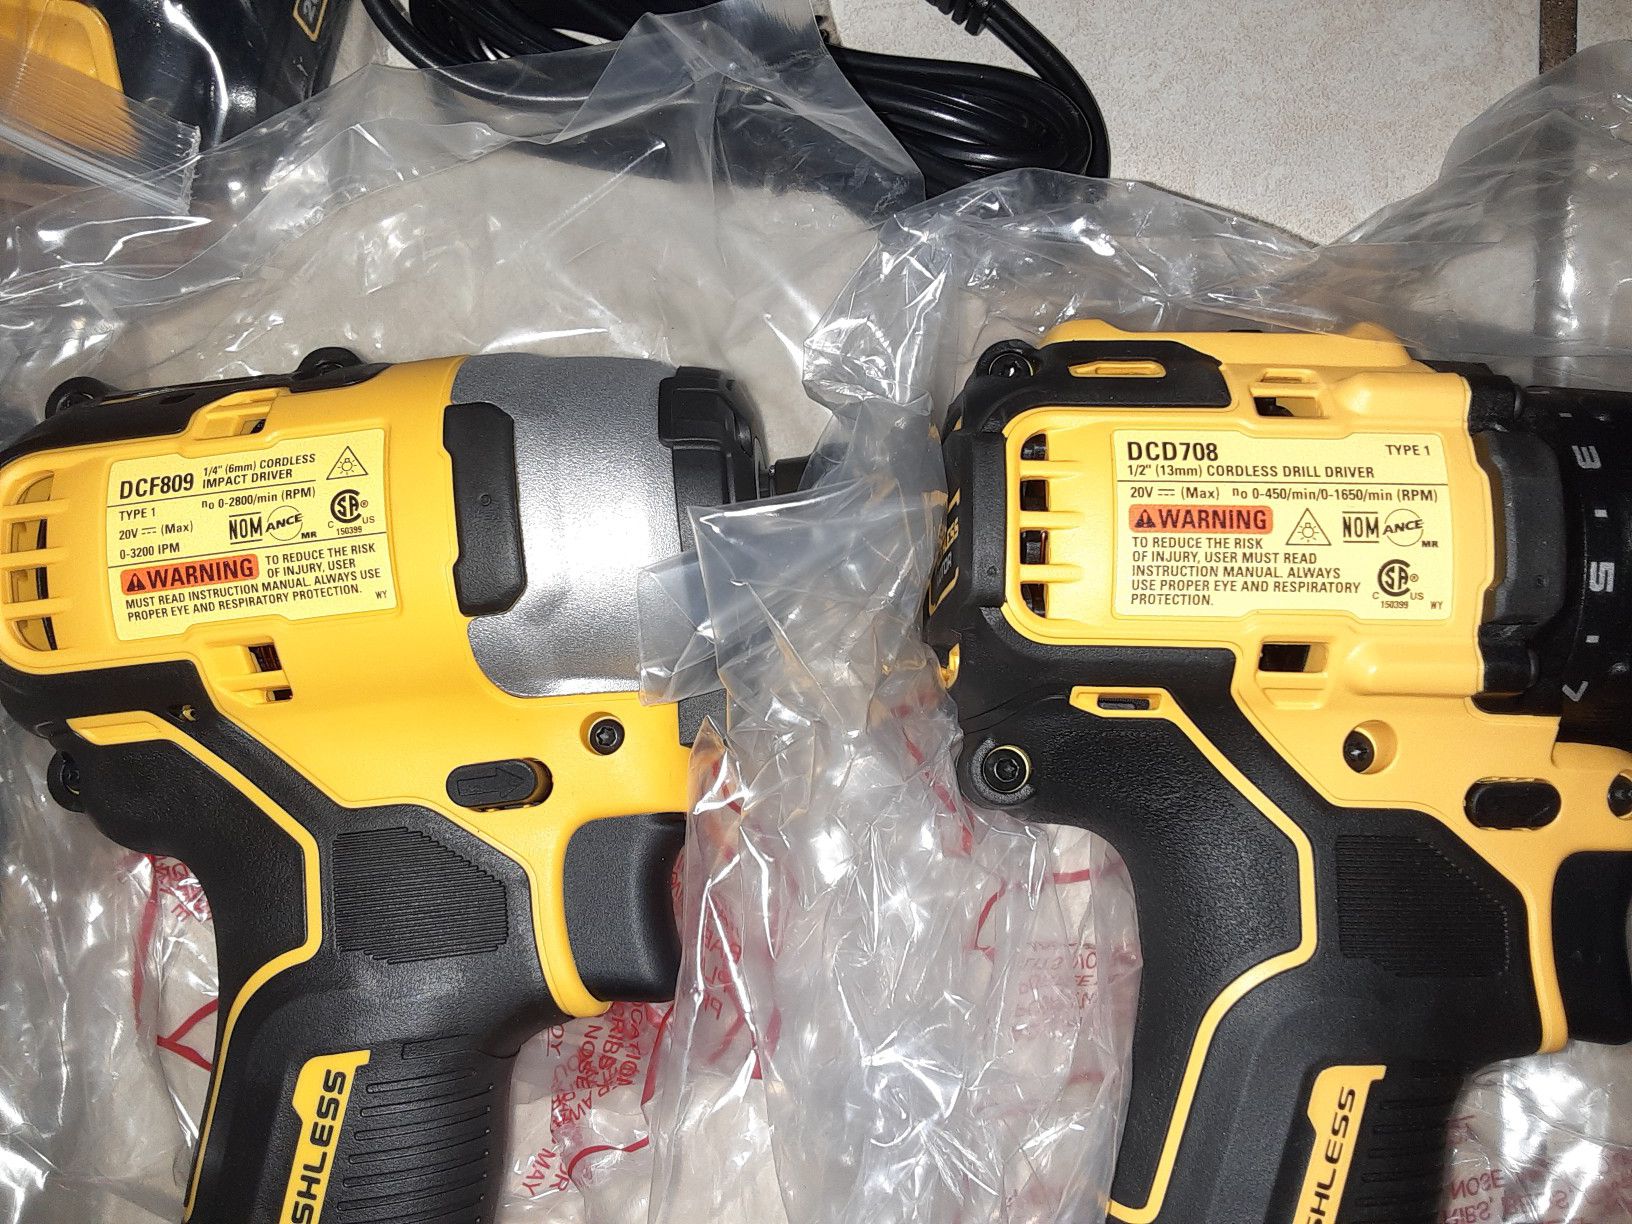 Dewalt 1/2 in drill driver with 1/4in impact with 145 pc. Bit set